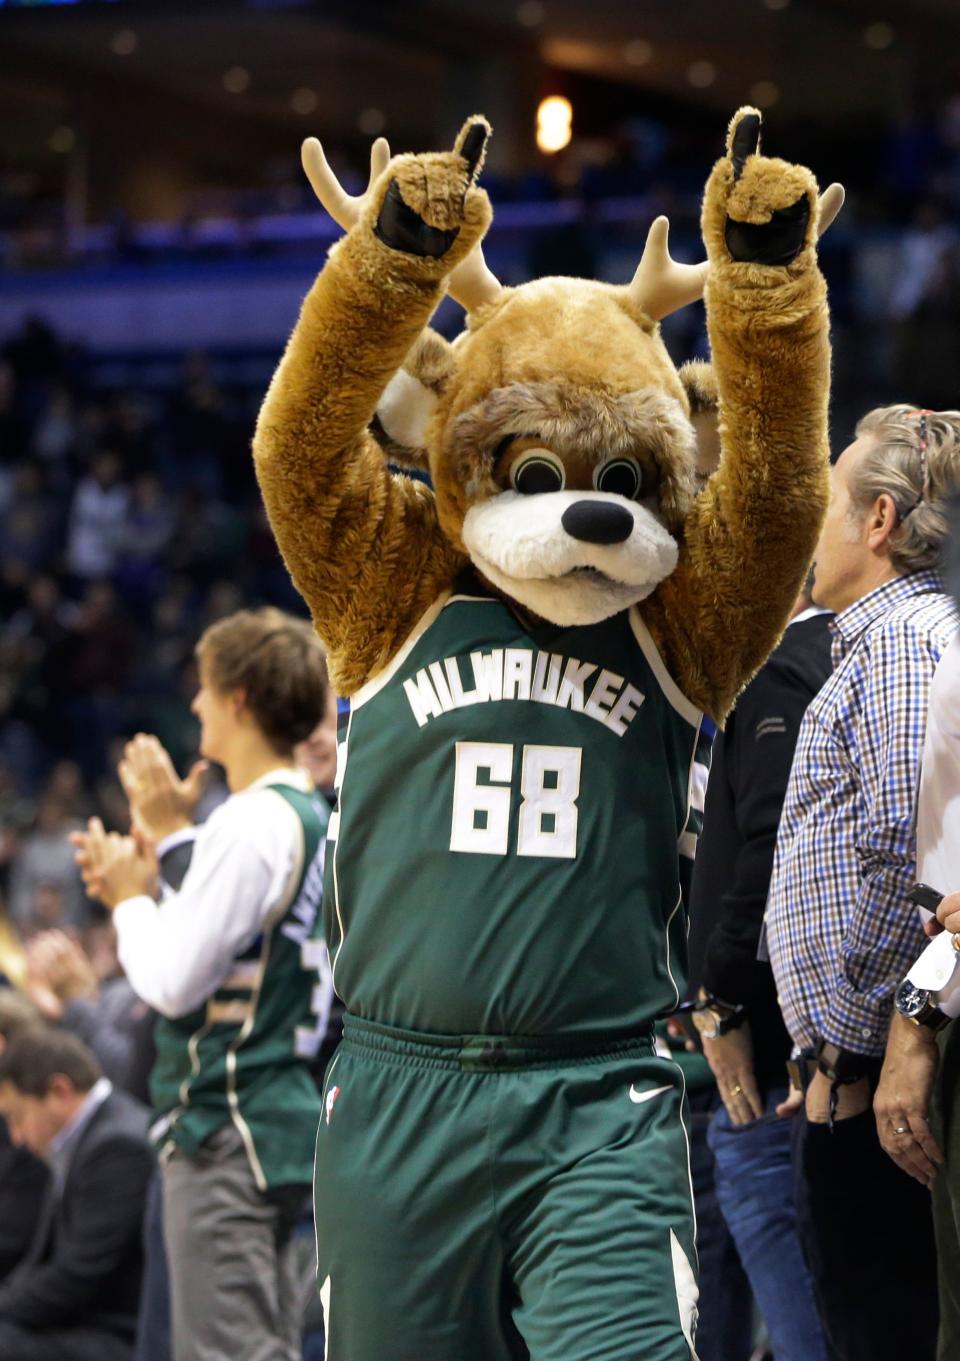 6. The Bucks’ mascot, Bango, made his debut in the team’s 1977-78 home opener. Bango was the name chosen by fans in a contest. Bango was also the call radio announcer, Eddie Doucette, made when players made a long-range basket.